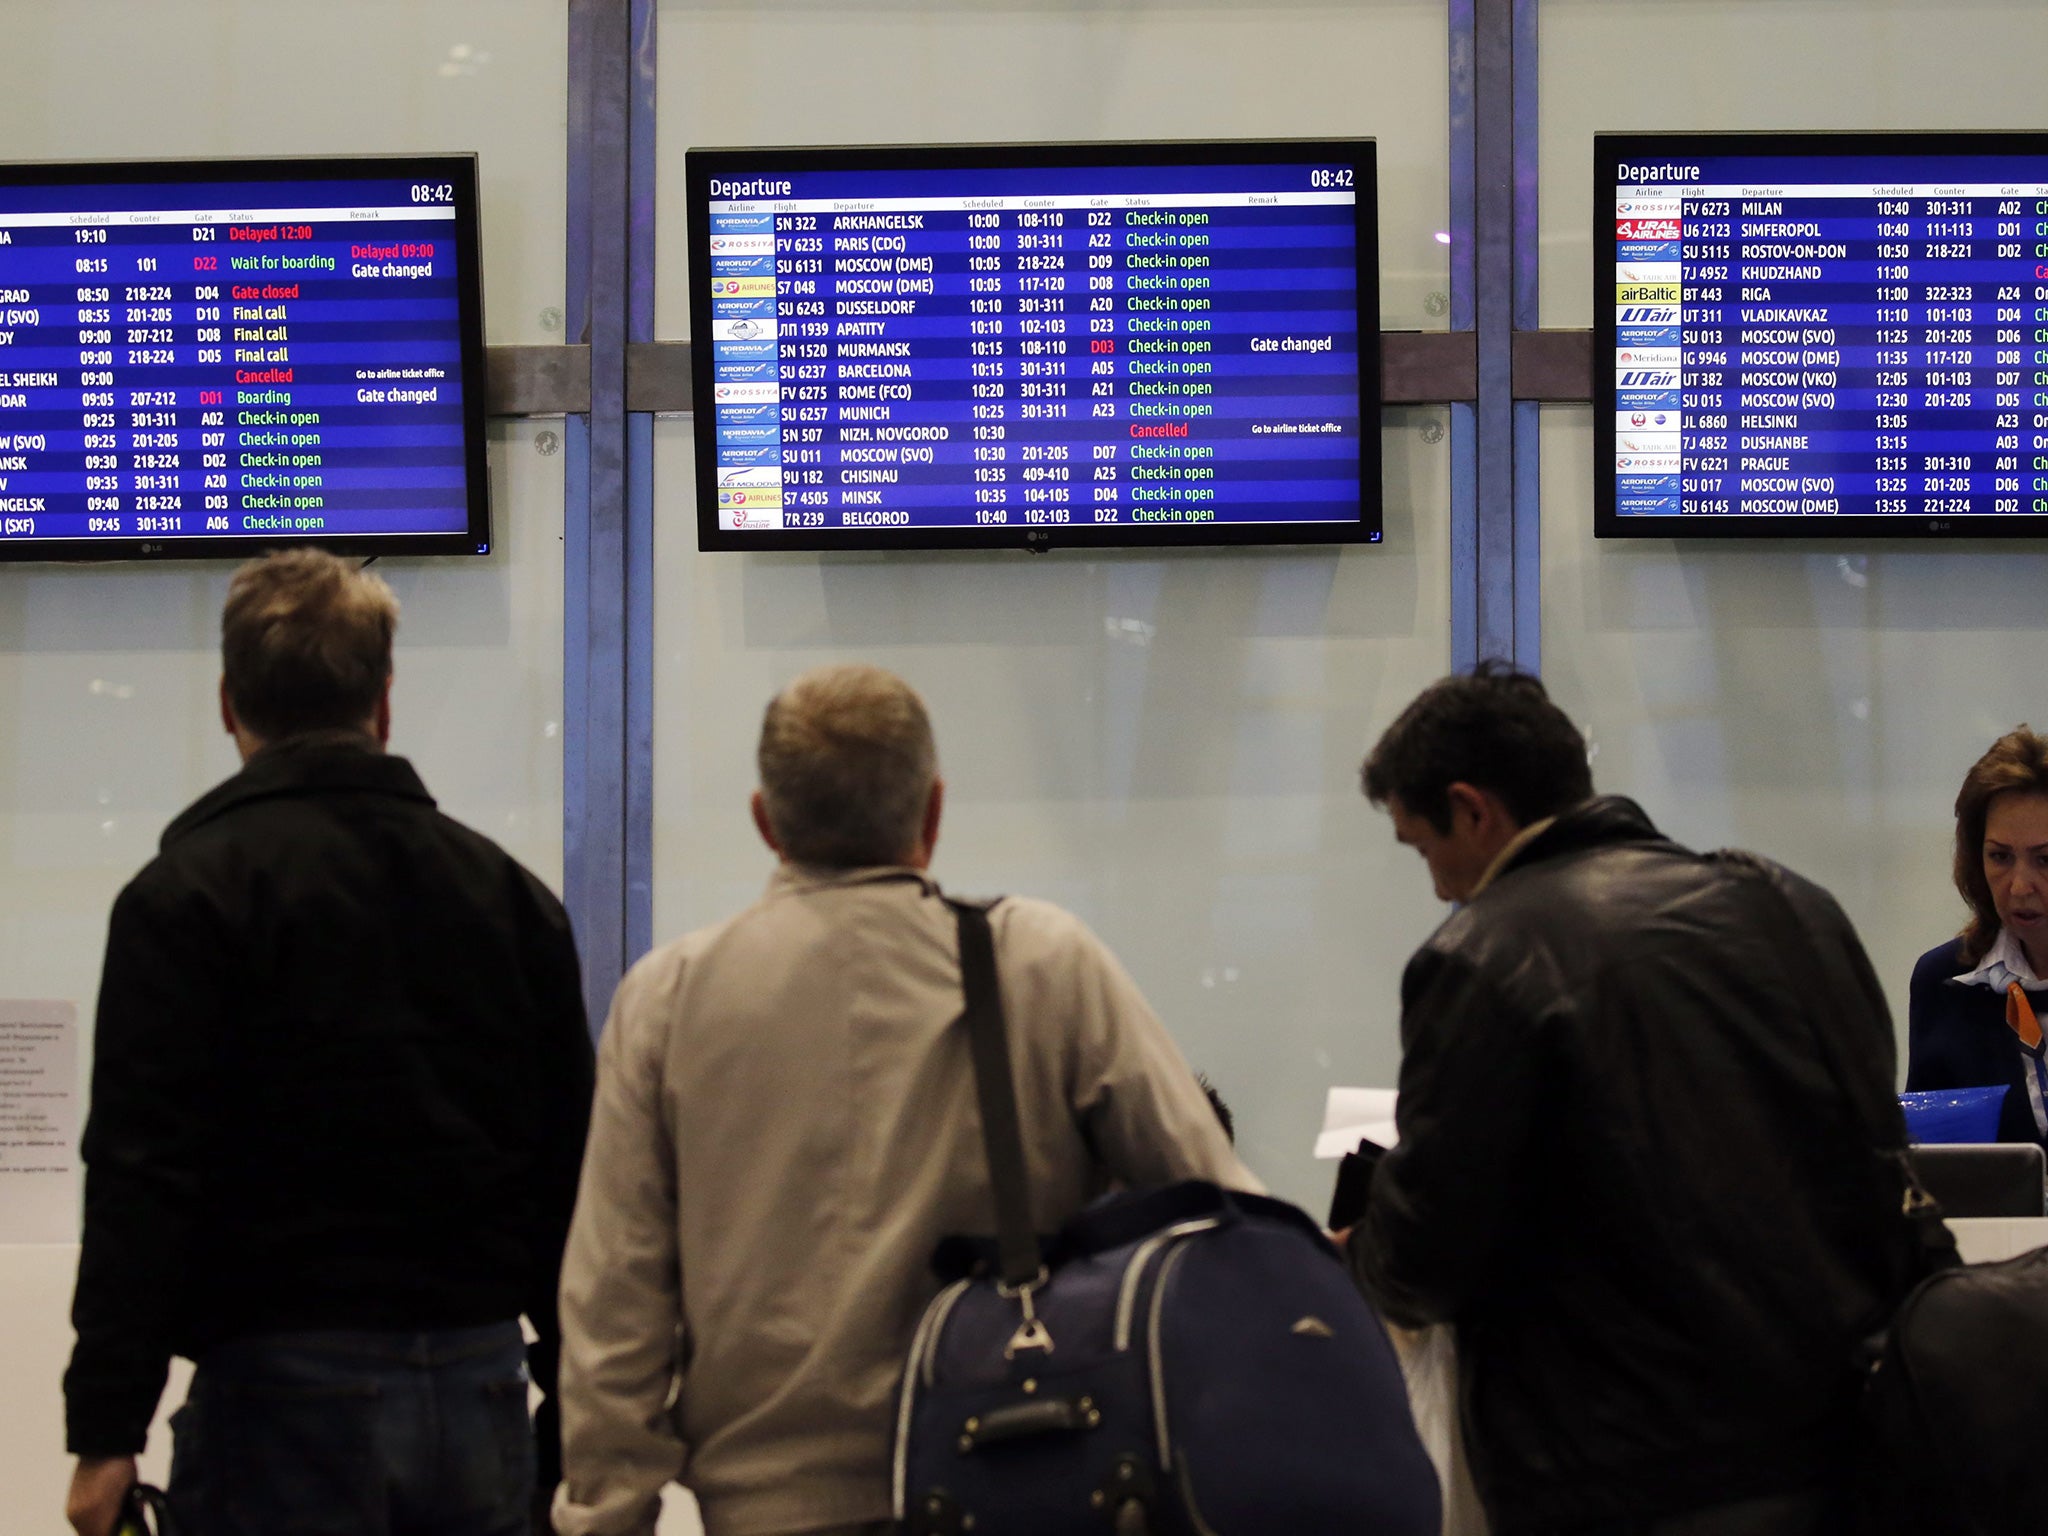 Passengers check monitors as flights to Sharm el-Sheikh appear as cancelled at Pulkovo airport in St. Petersburg, Russia on 7 November